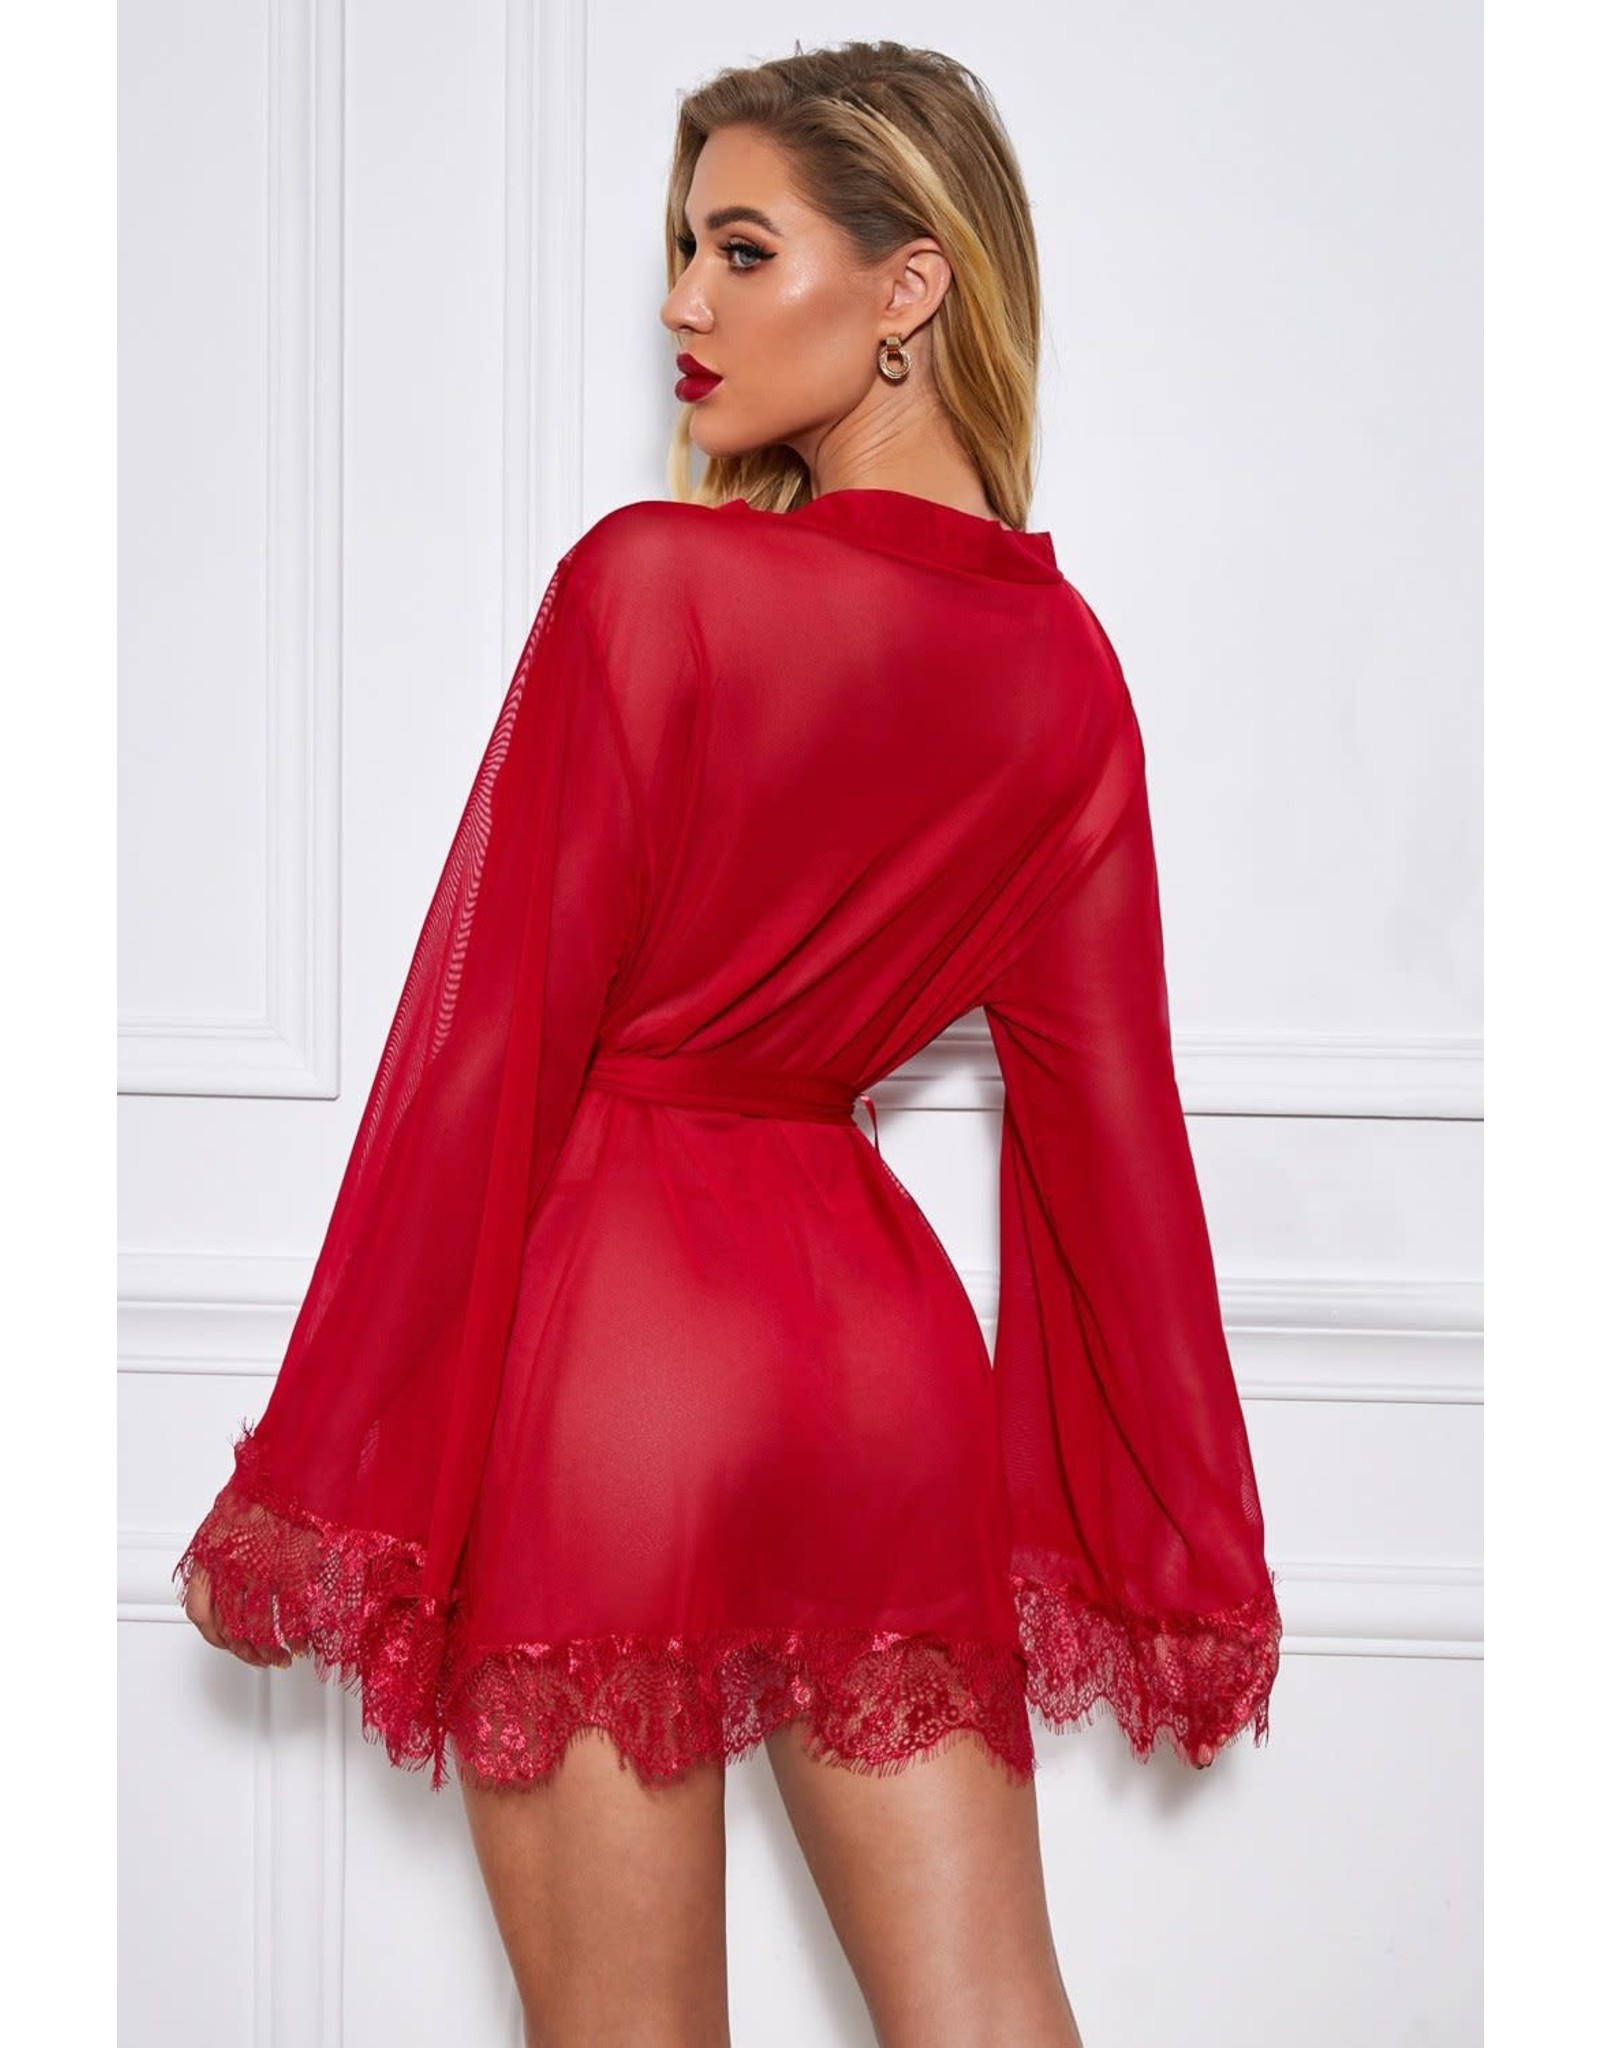 FOREPLAY BELL SLEEVES WRAPPED ROBE WITH THONG - (US 8-10)M